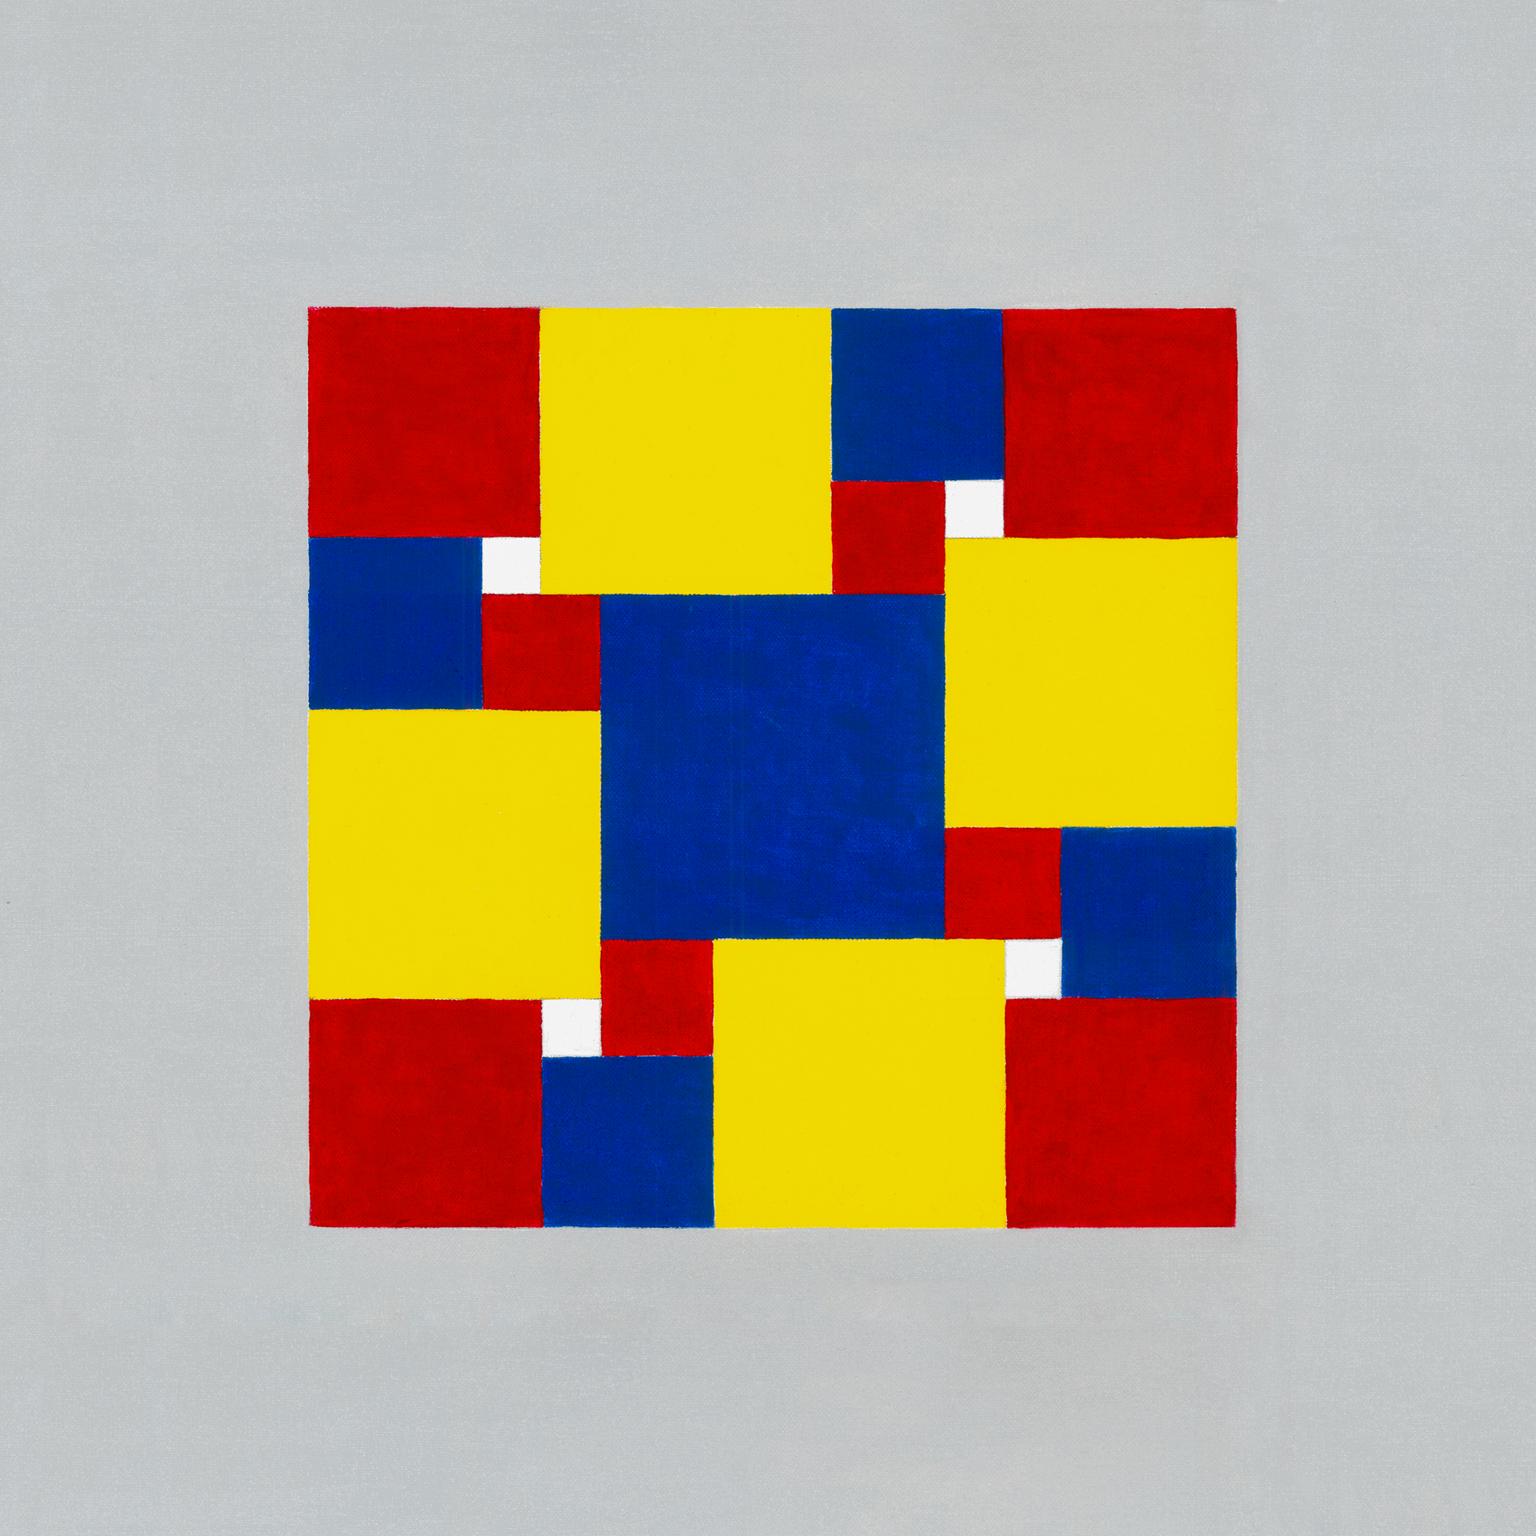 Image for entry 'The Symmetric Four-Color Simple Imperfect Squared Square'